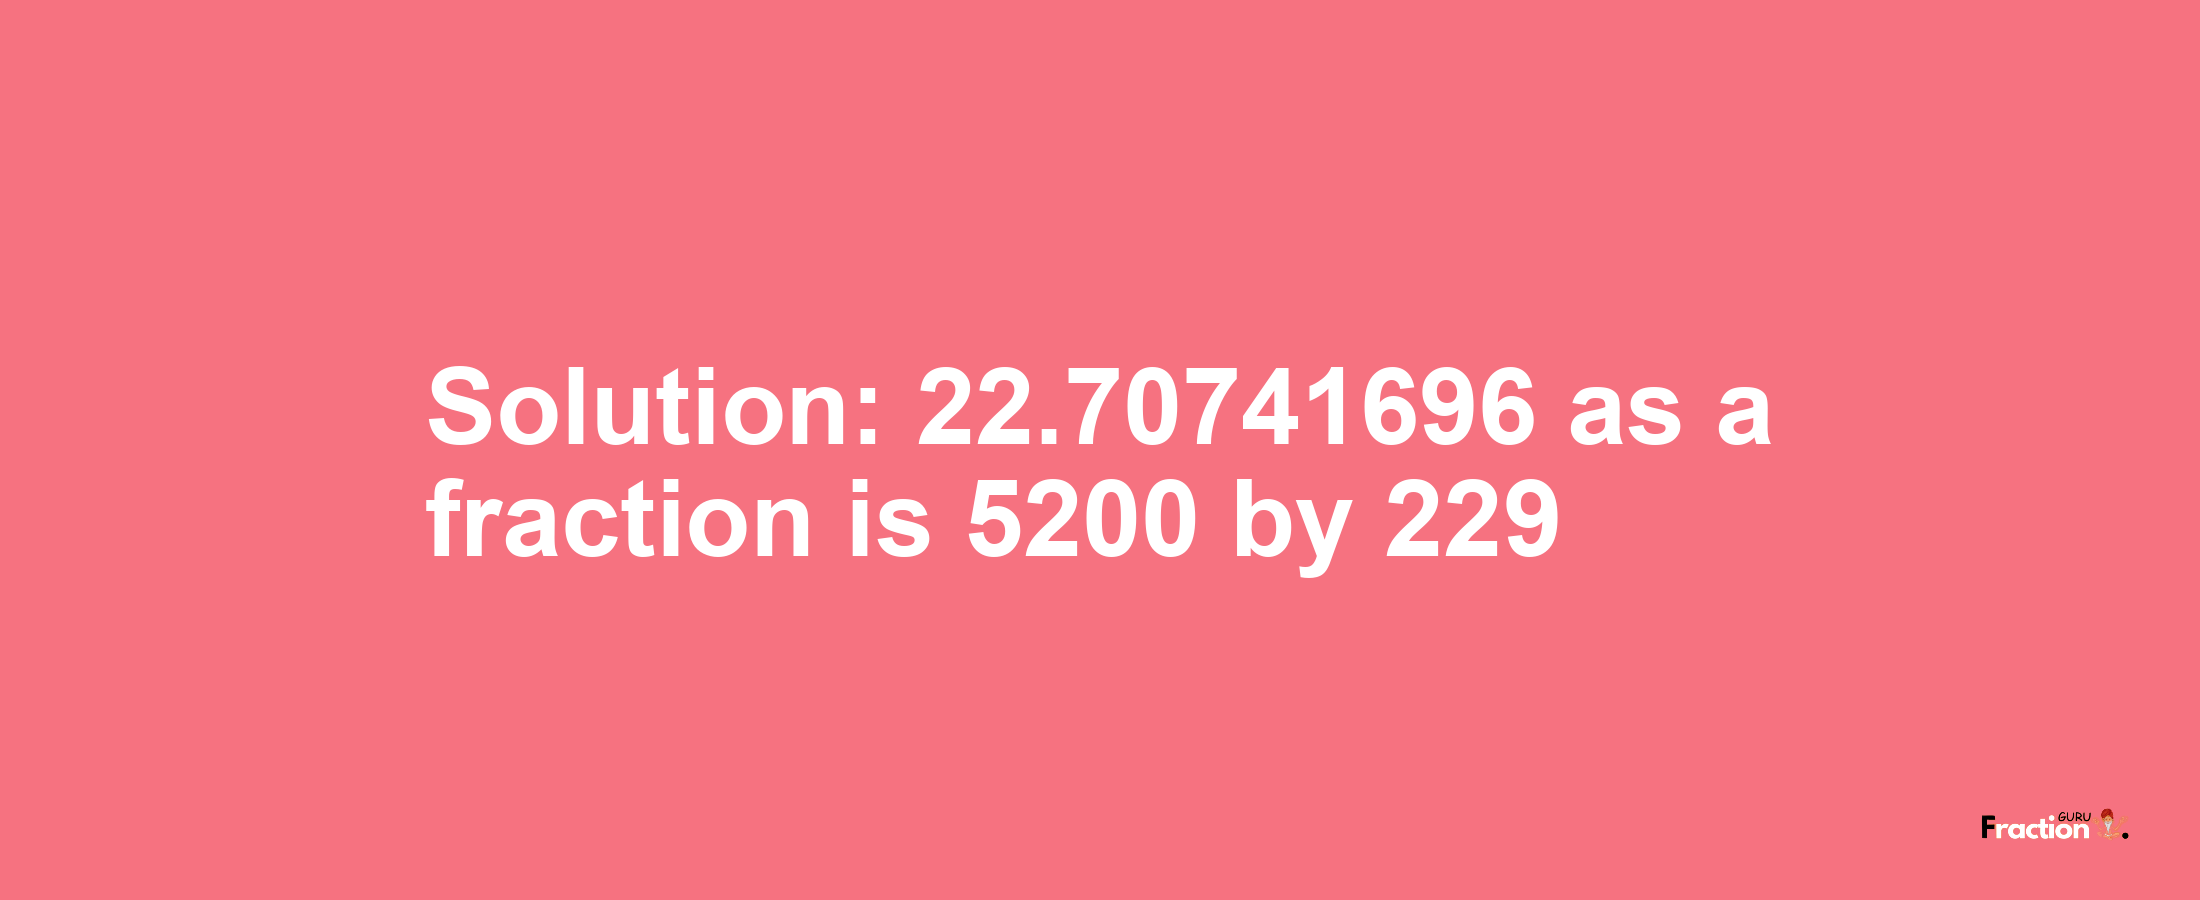 Solution:22.70741696 as a fraction is 5200/229